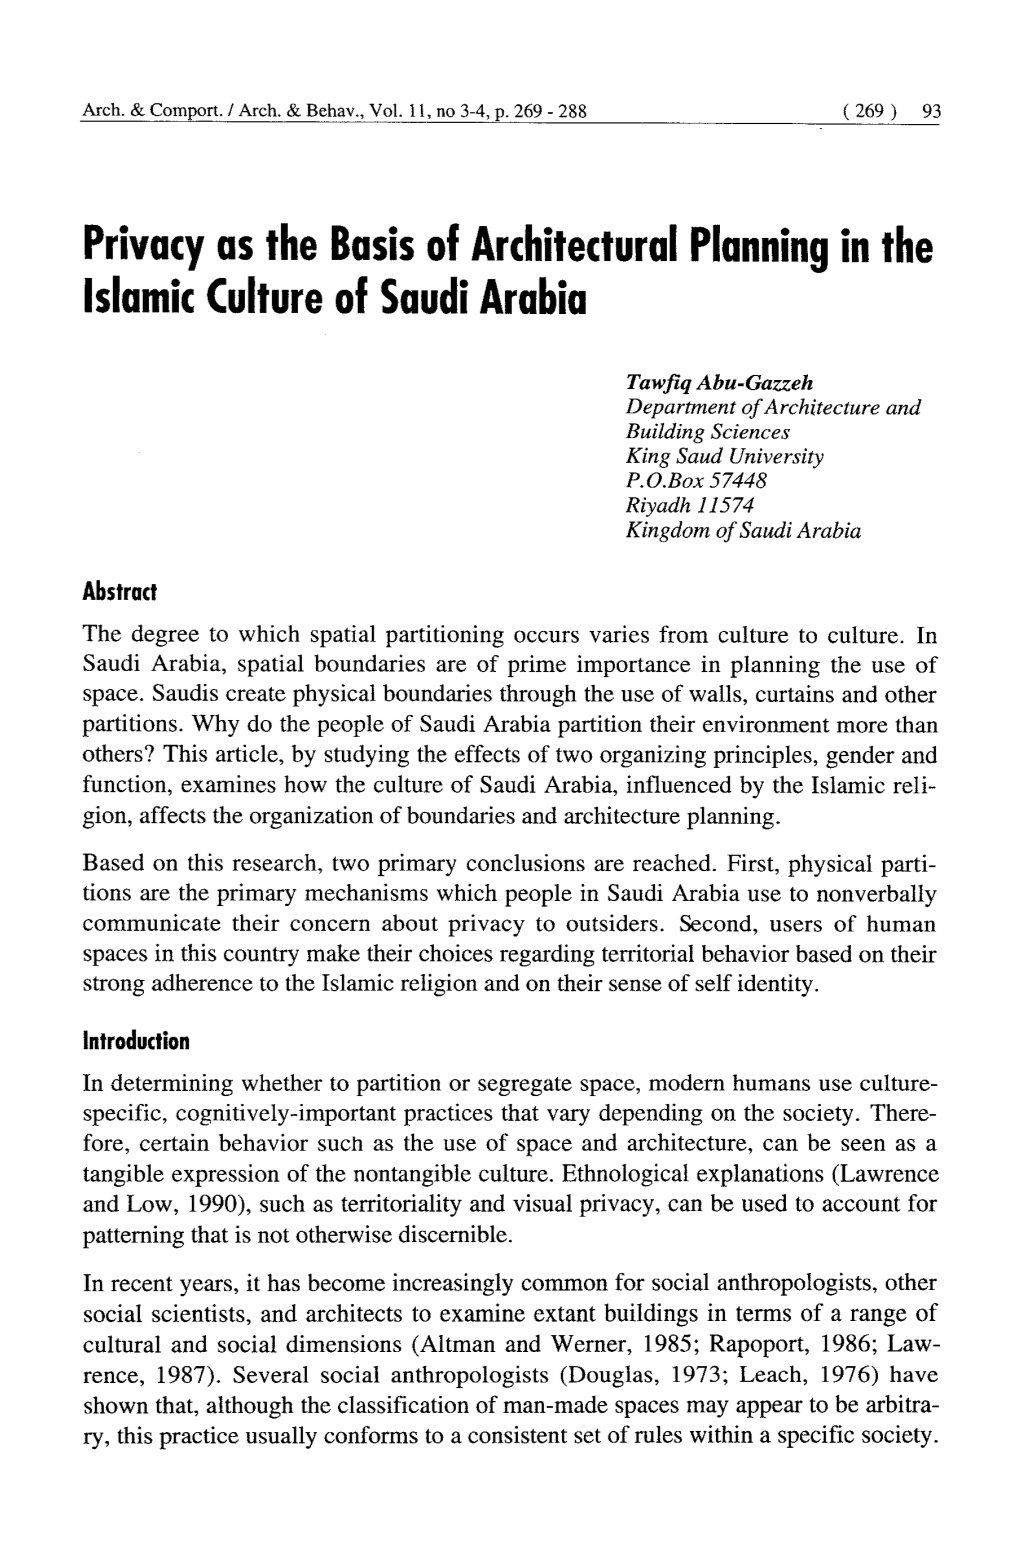 Privacy As the Basis of Architectural Planning in the Islamic Culture of Saudi Arabia